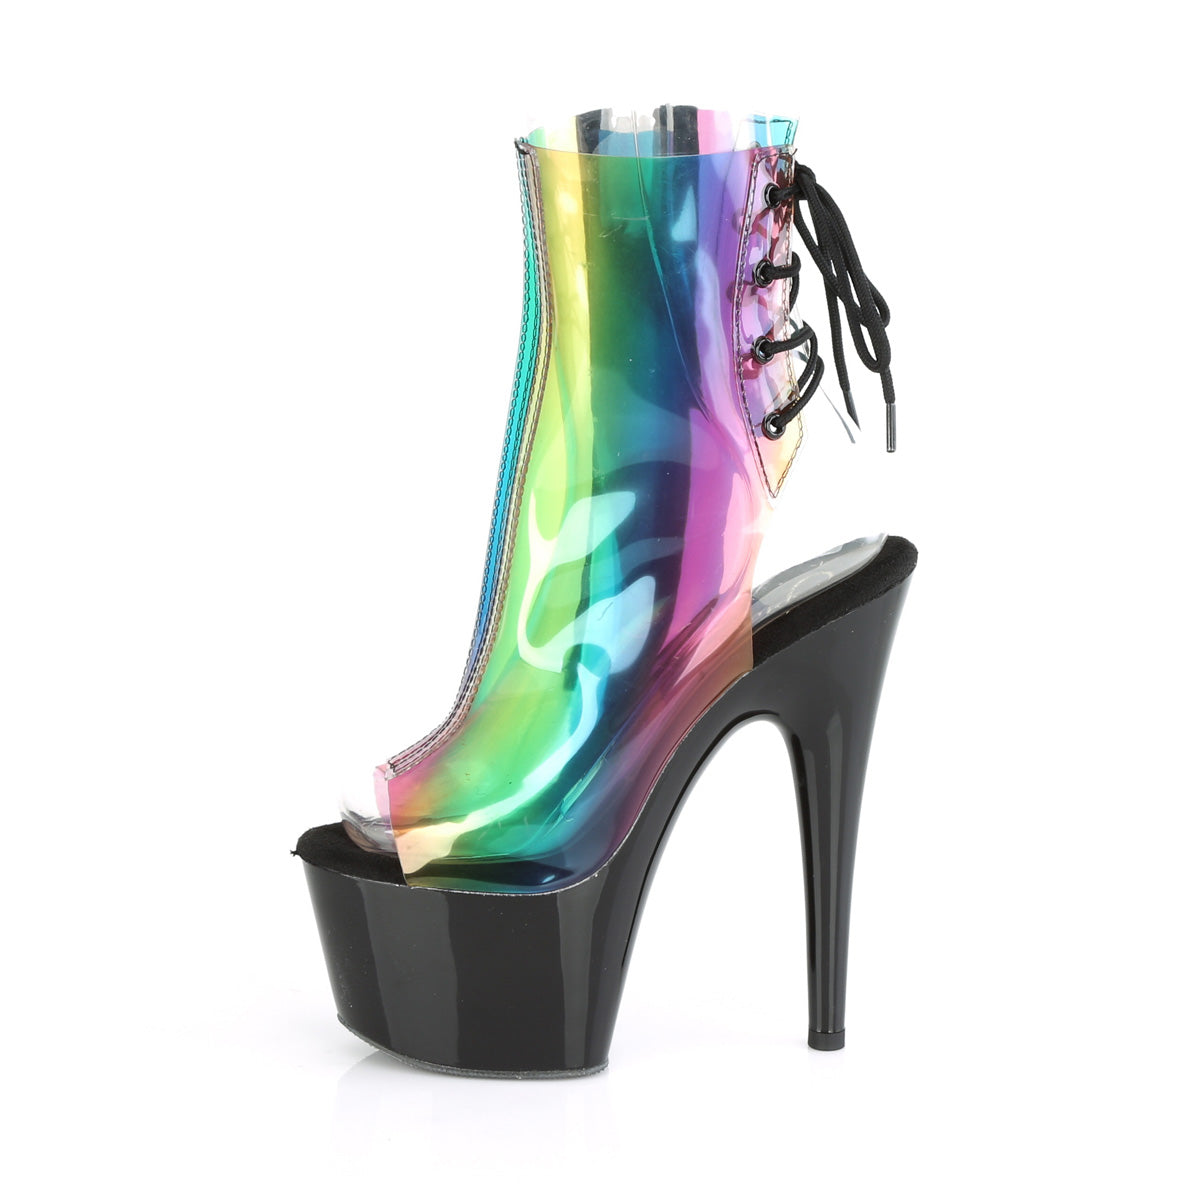 ADORE-1018C-RB Pleaser 7" Heel Rainbow Strippers Ankle Boots-Pleaser- Sexy Shoes Pole Dance Heels